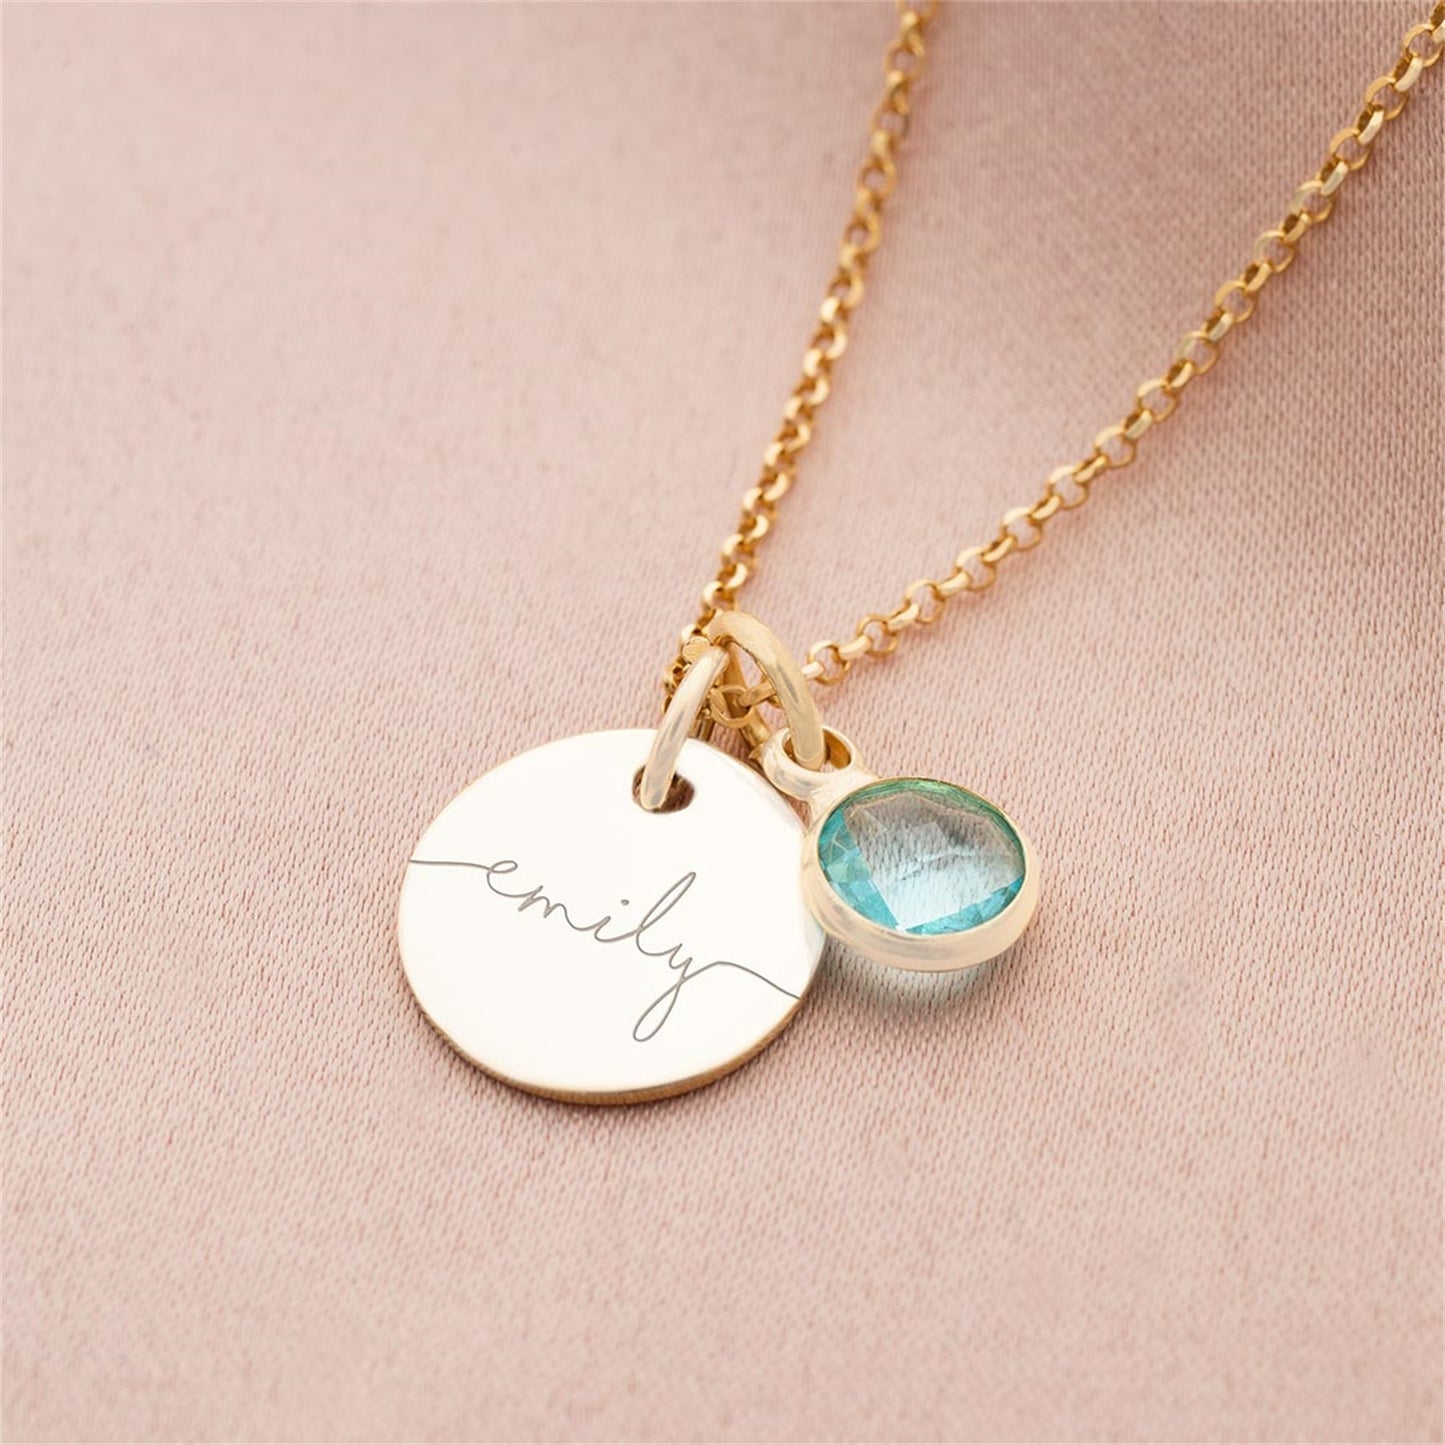 Birthstone Personalized Necklace